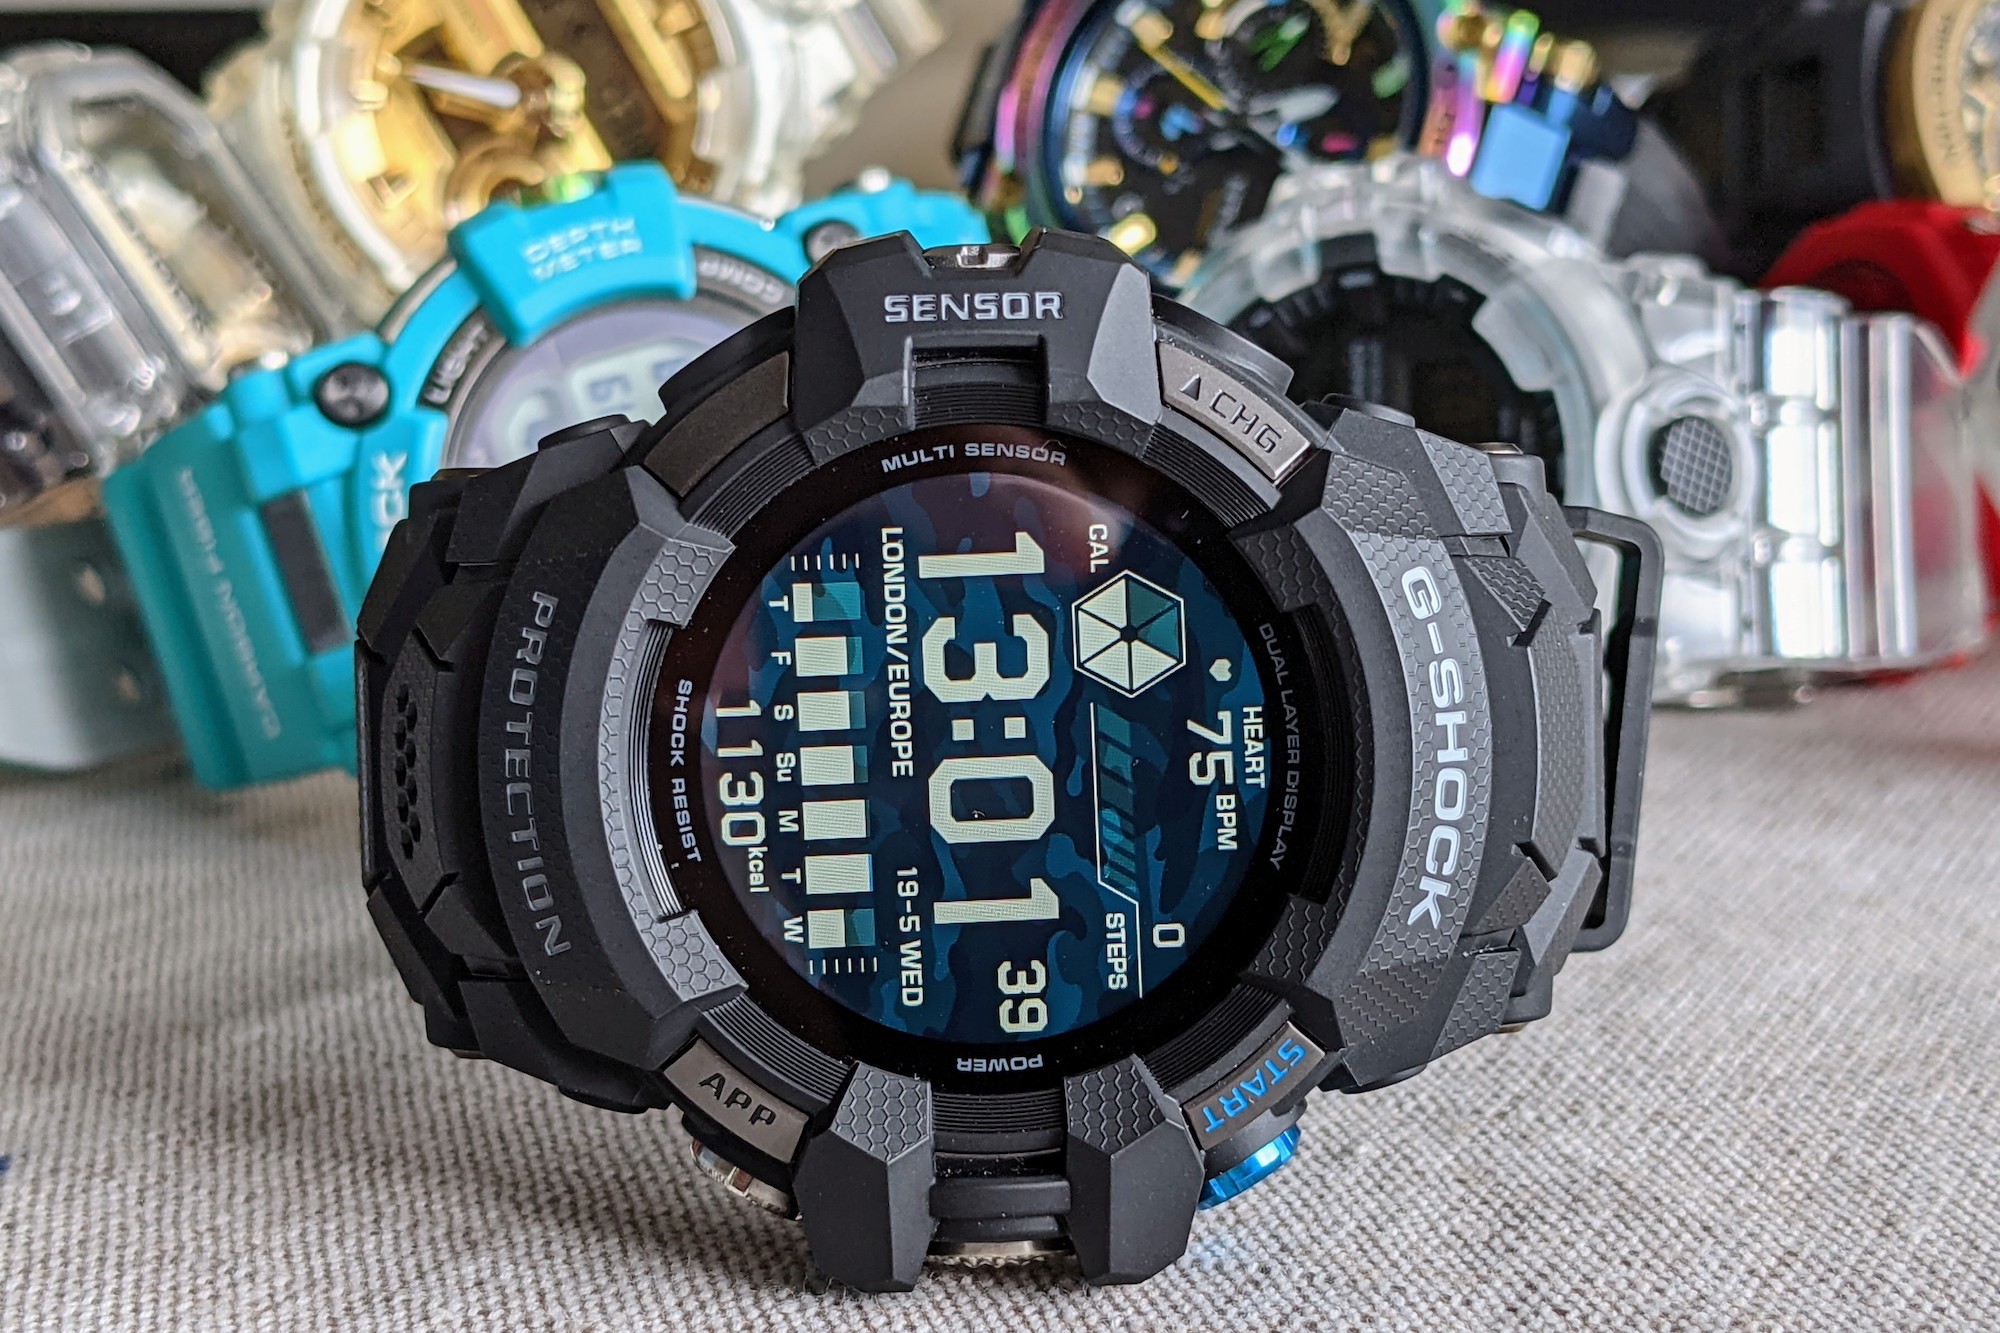 Abe Rudyard Kipling Hver uge G-Shock GSW-H1000 Review: The G-Shock Collector's Choice | Digital Trends